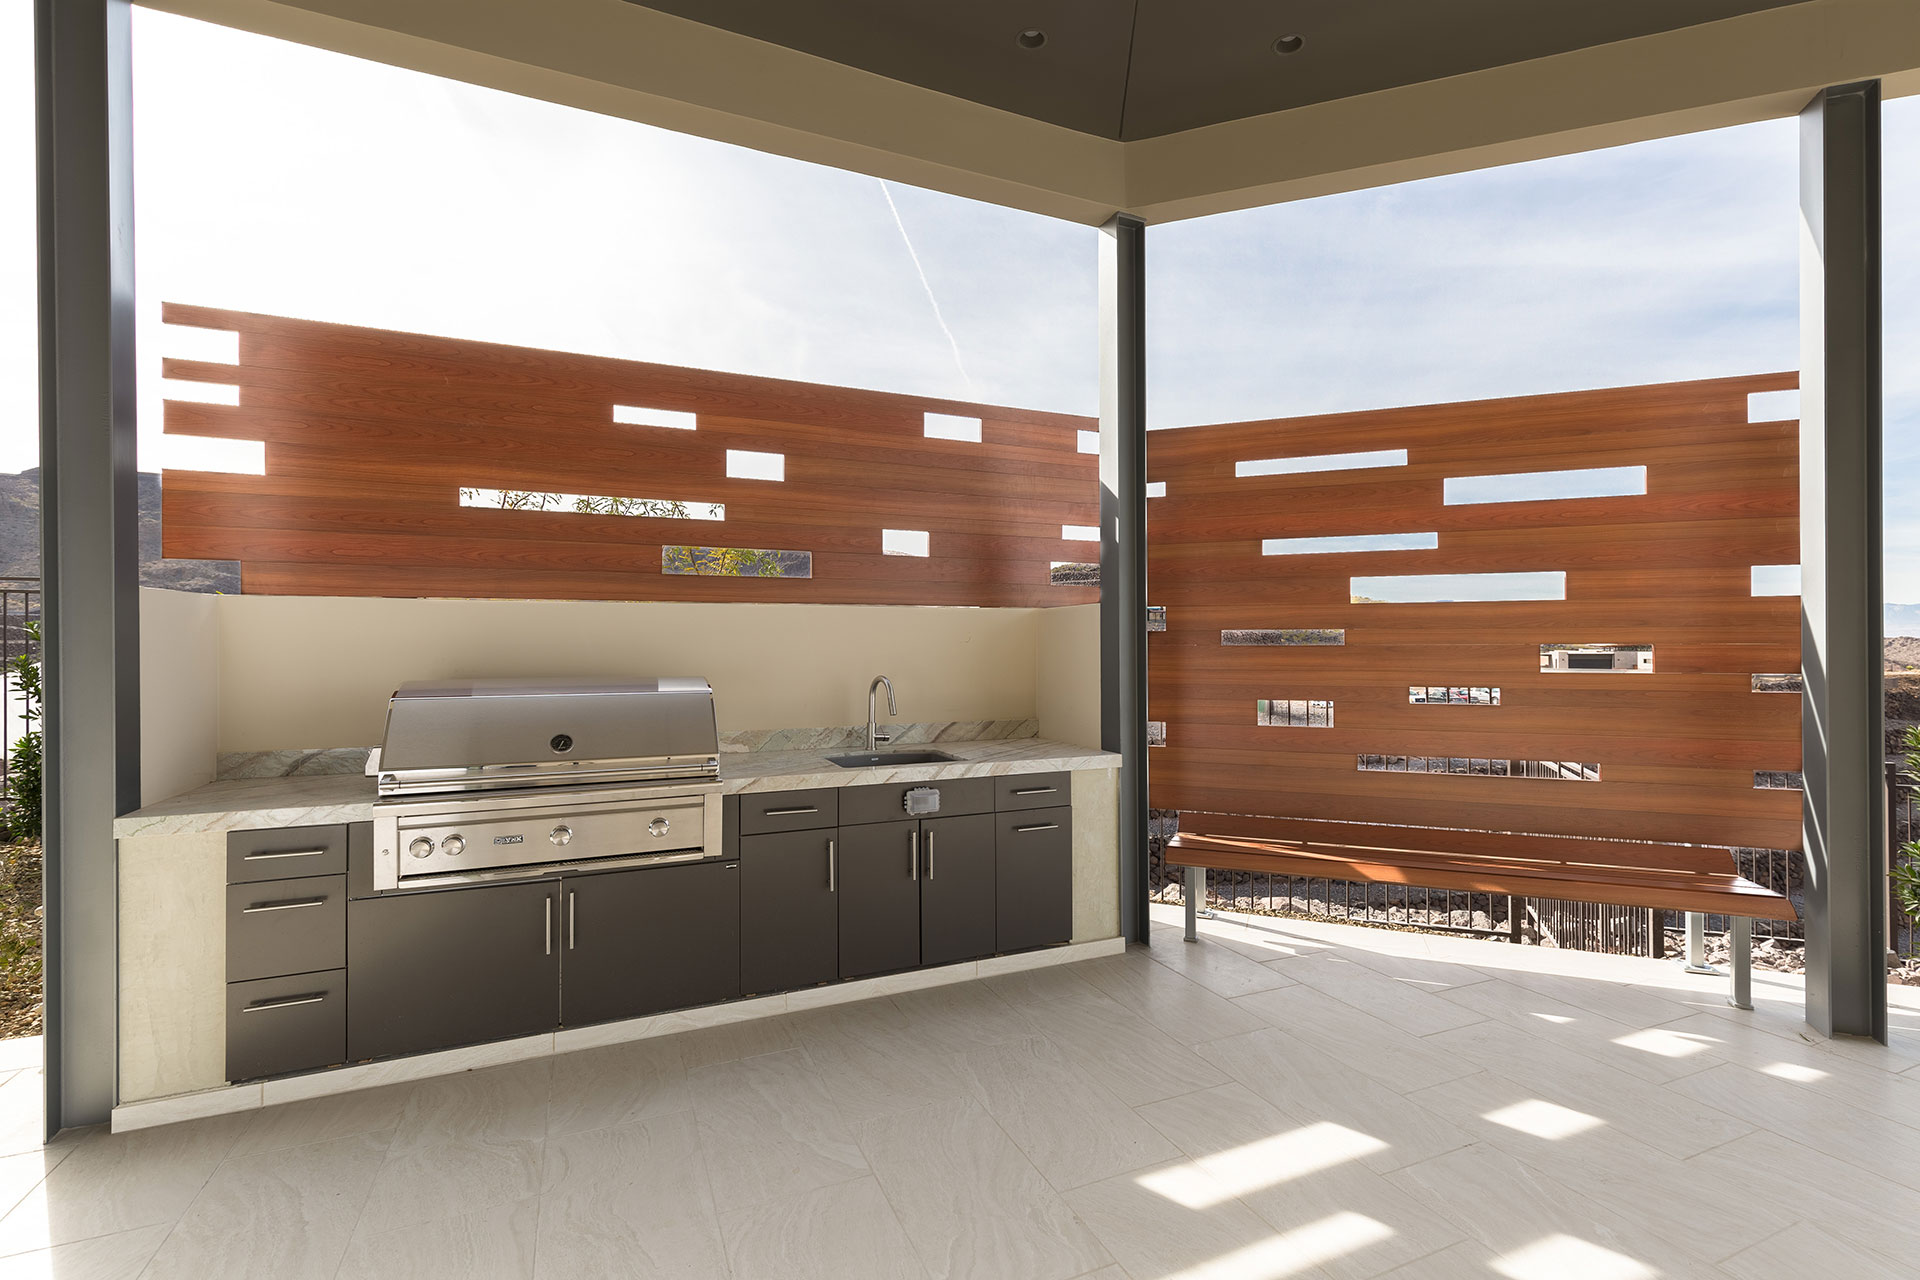 A stainless steel built-in backward bbq with wood-like aluminum fencing and bench atop light beige tiled flooring with cloudy bright daylight in the background.